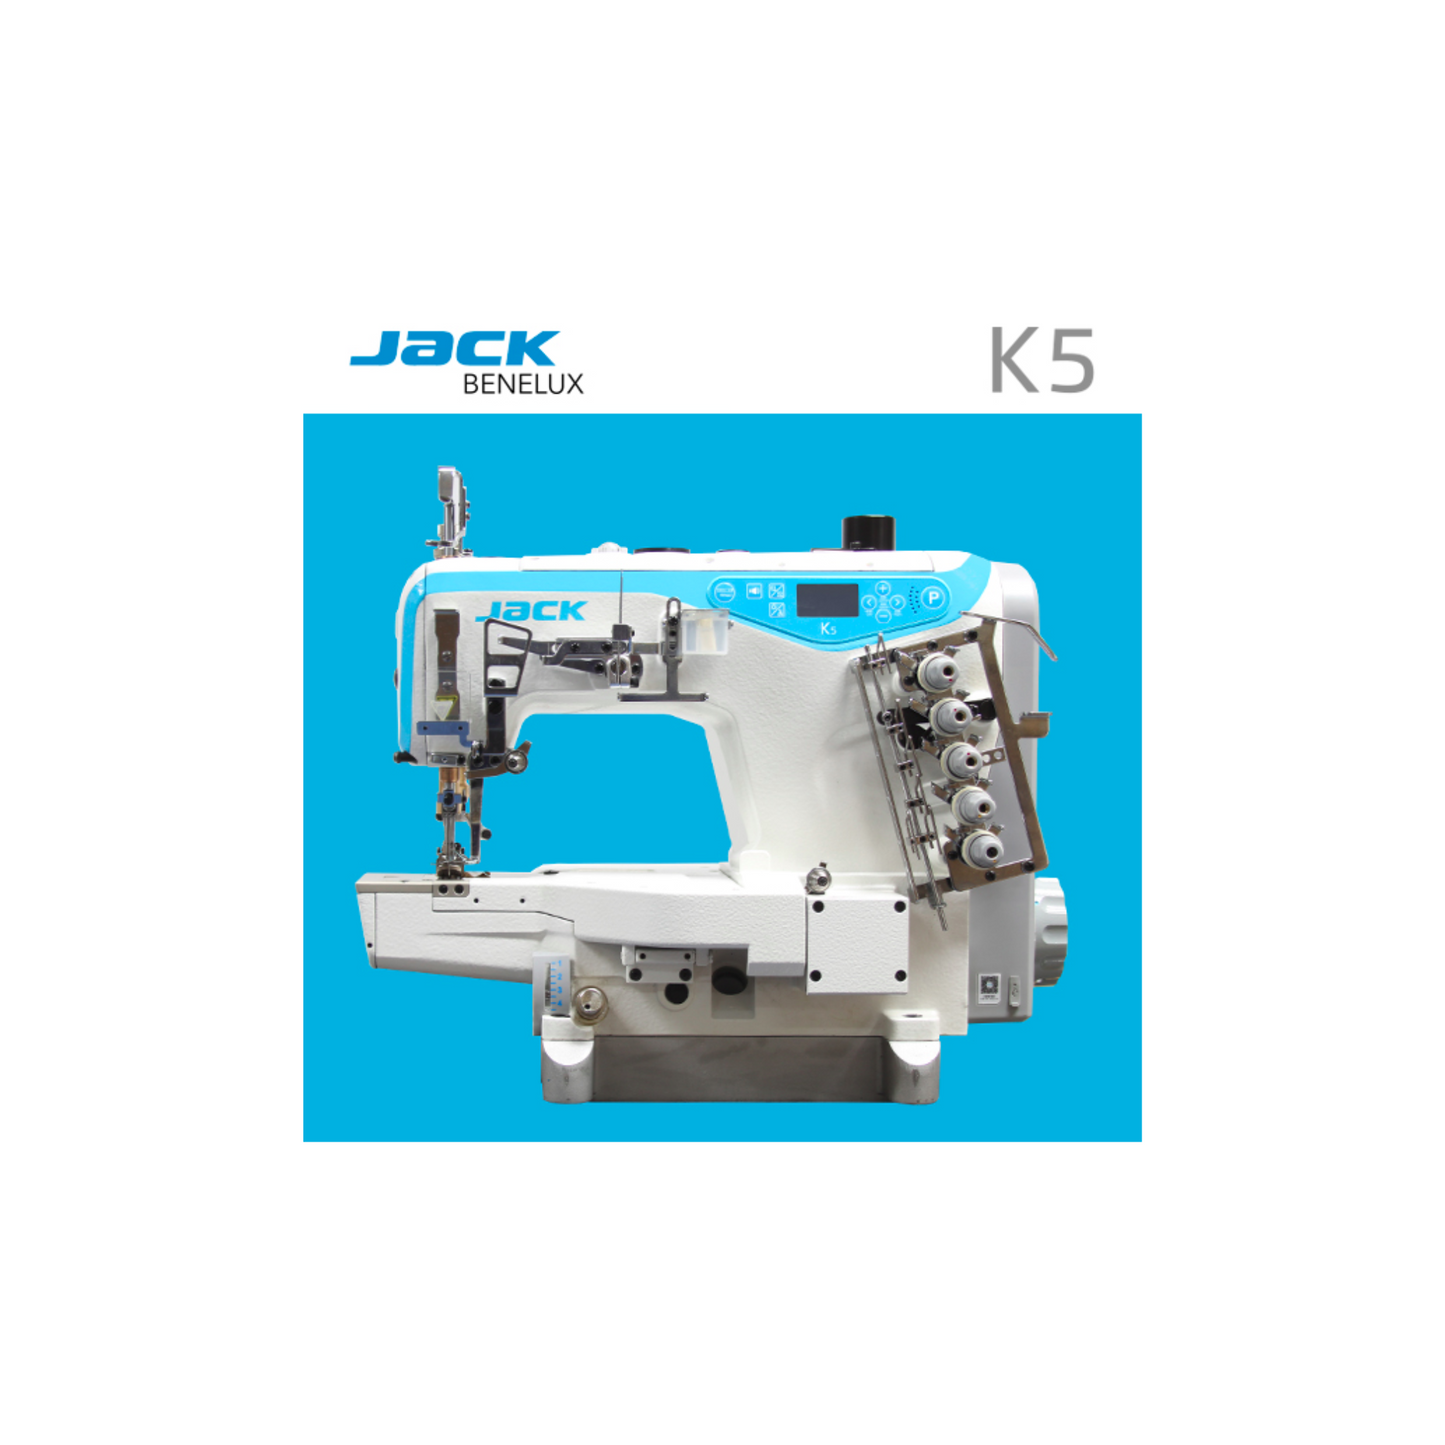 Jack K5-UT-01GB-x356 fully automatic cylinder arm coverstitch machine - Sewing machine - White - Front view